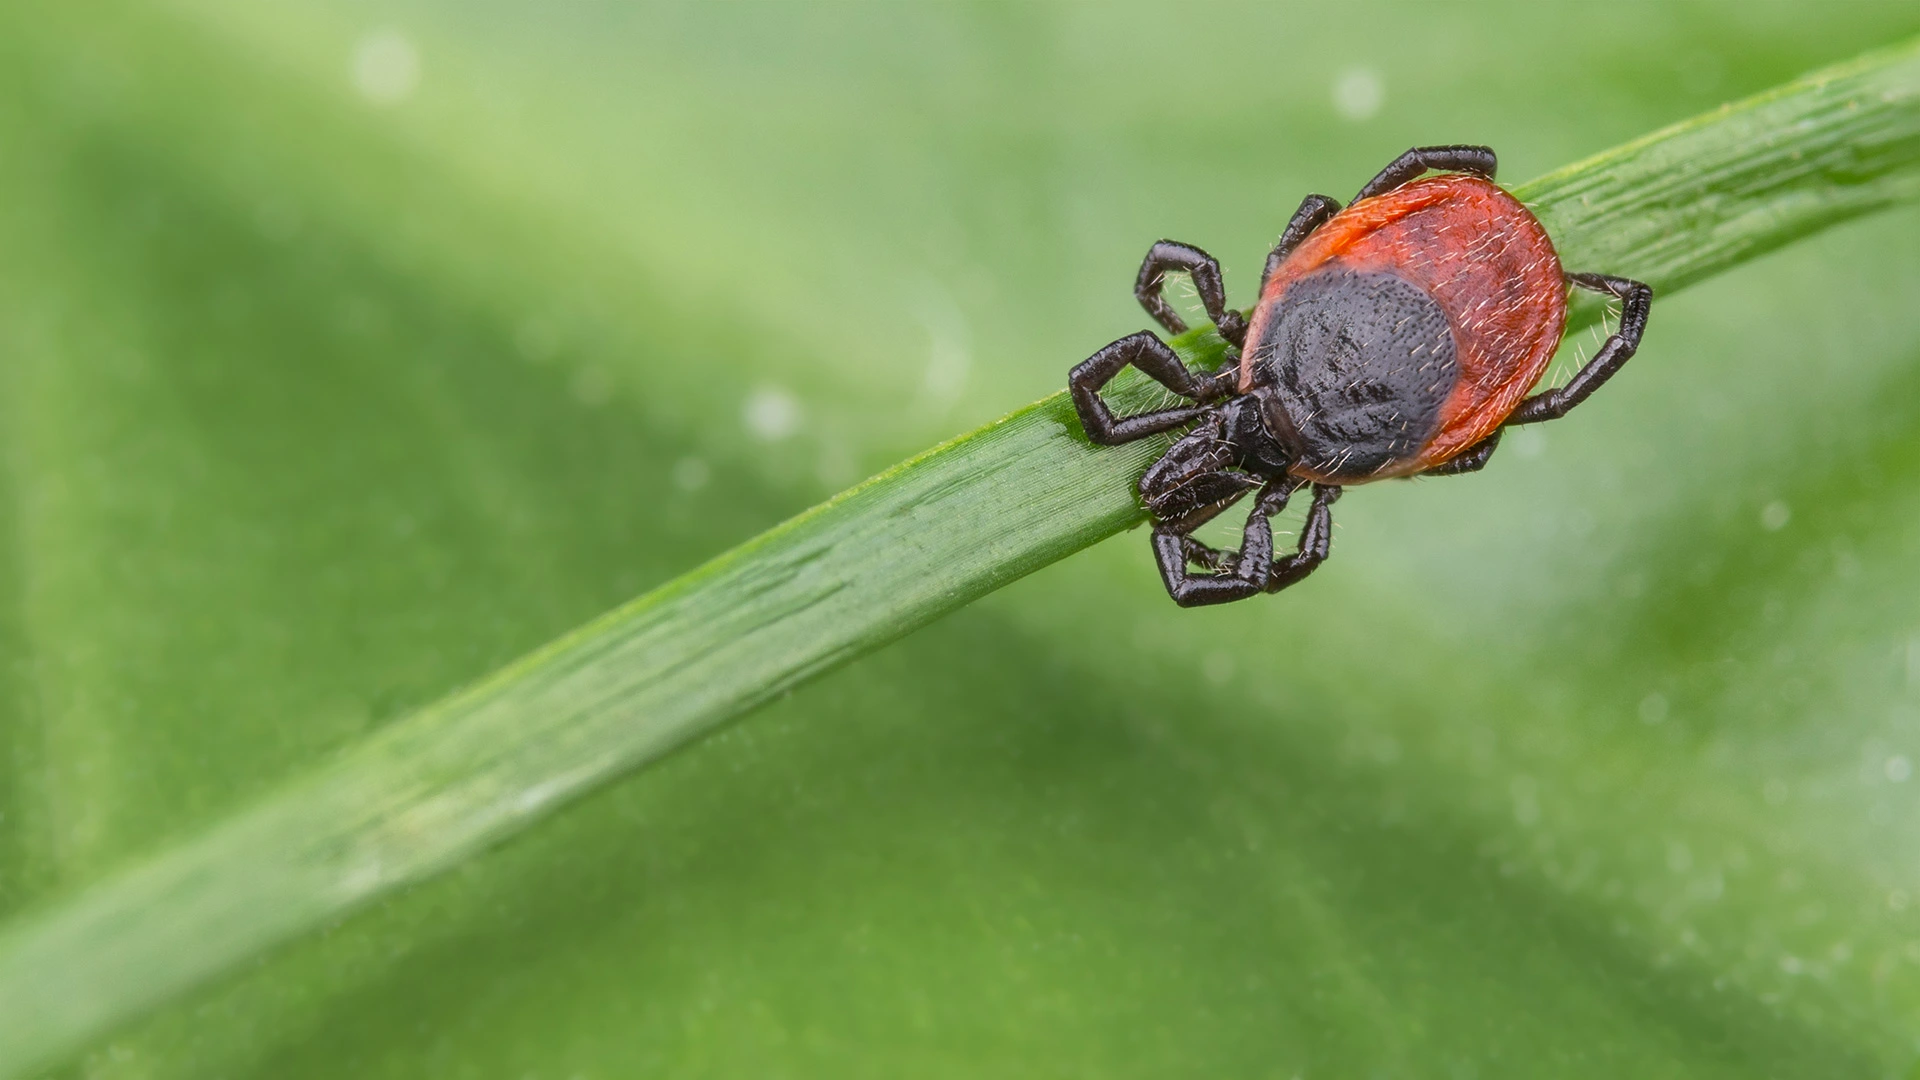 Dealing With Fleas & Ticks on Your Property? Here’s How to Keep Them at Bay